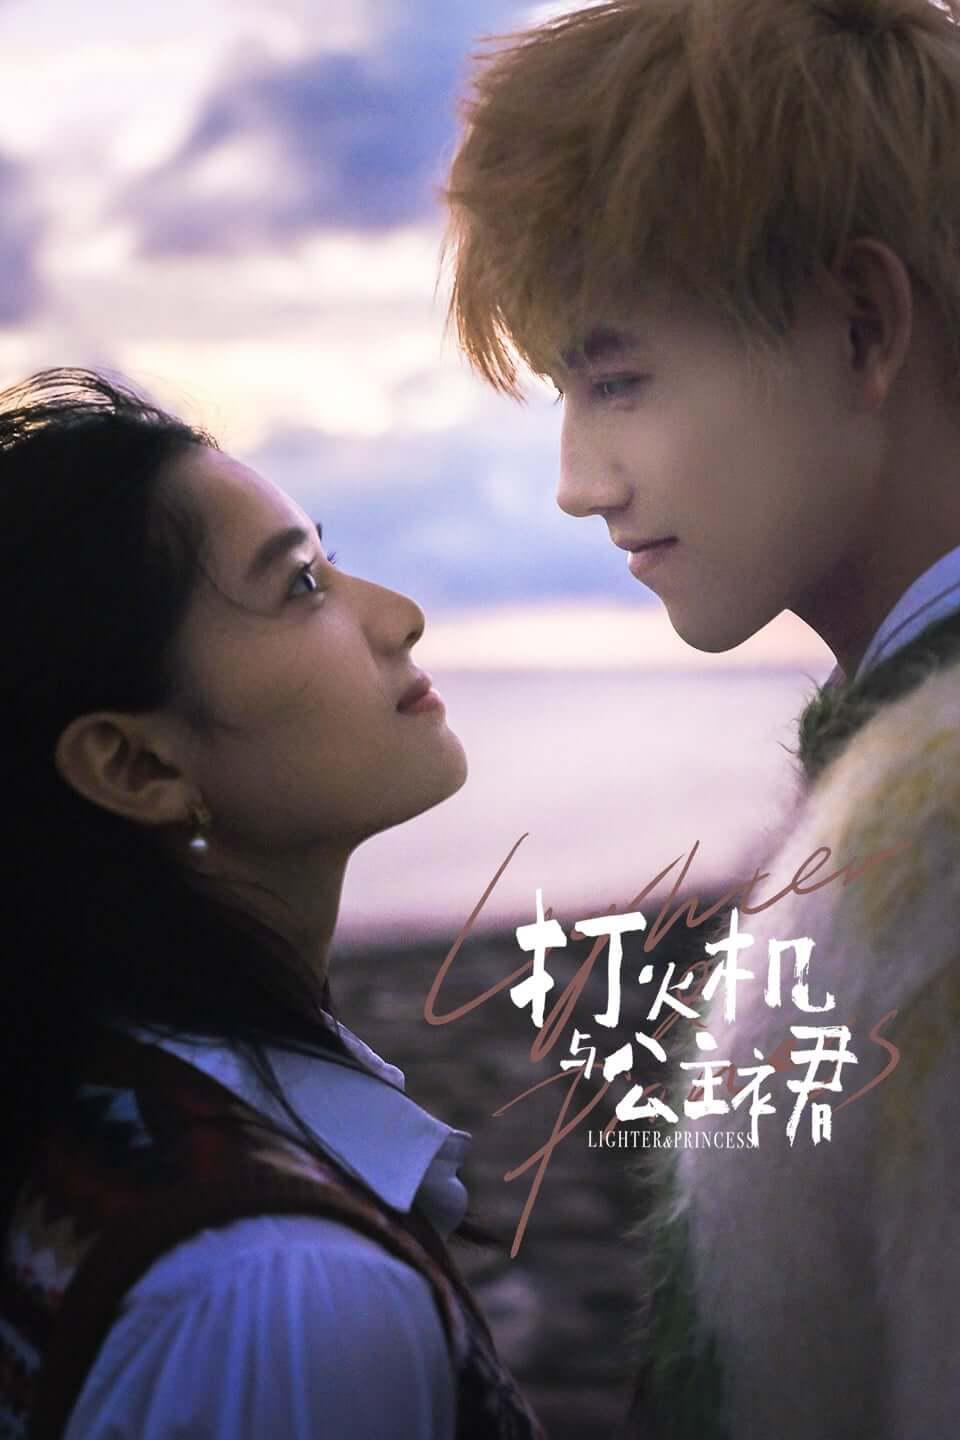 TV ratings for Lighter And Princess (点燃我，温暖你) in los Reino Unido. Youku TV series